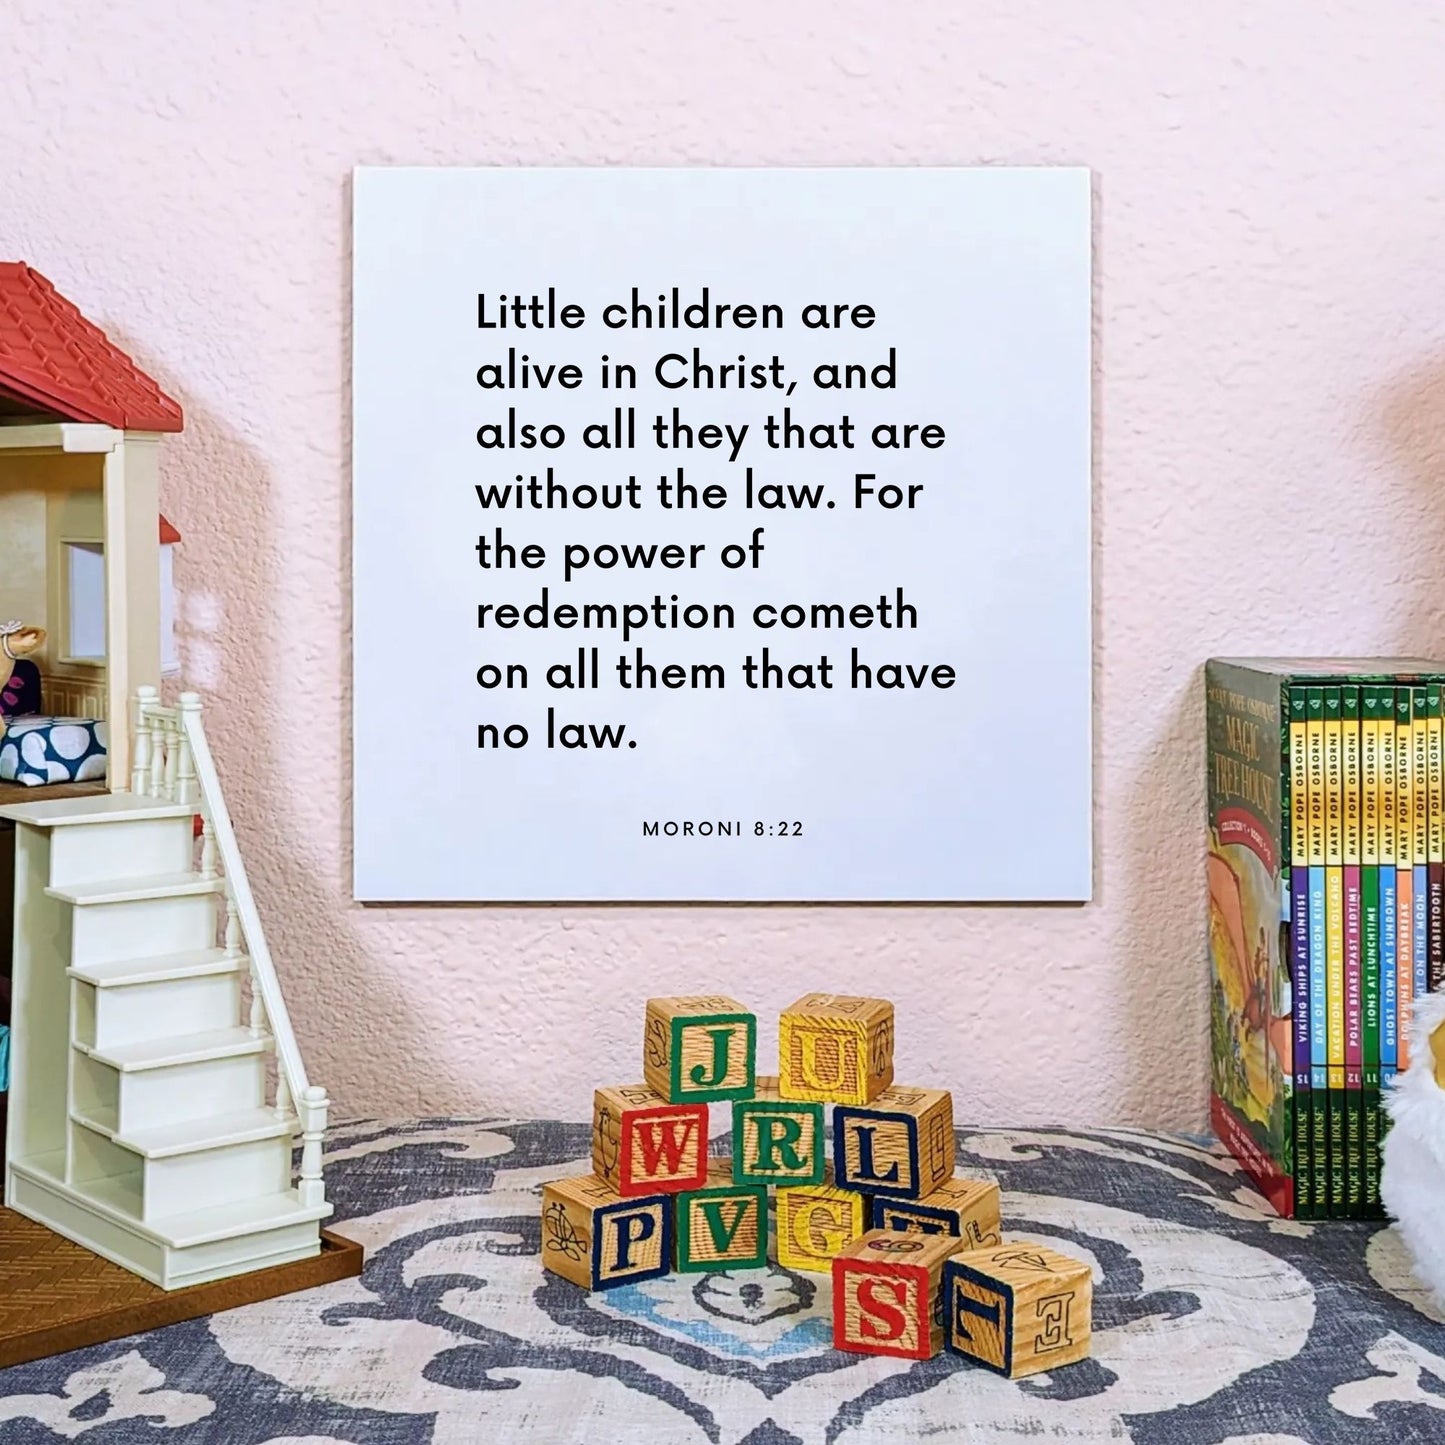 Playroom mouting of the scripture tile for Moroni 8:22 - "Redemption cometh on all them that have no law"